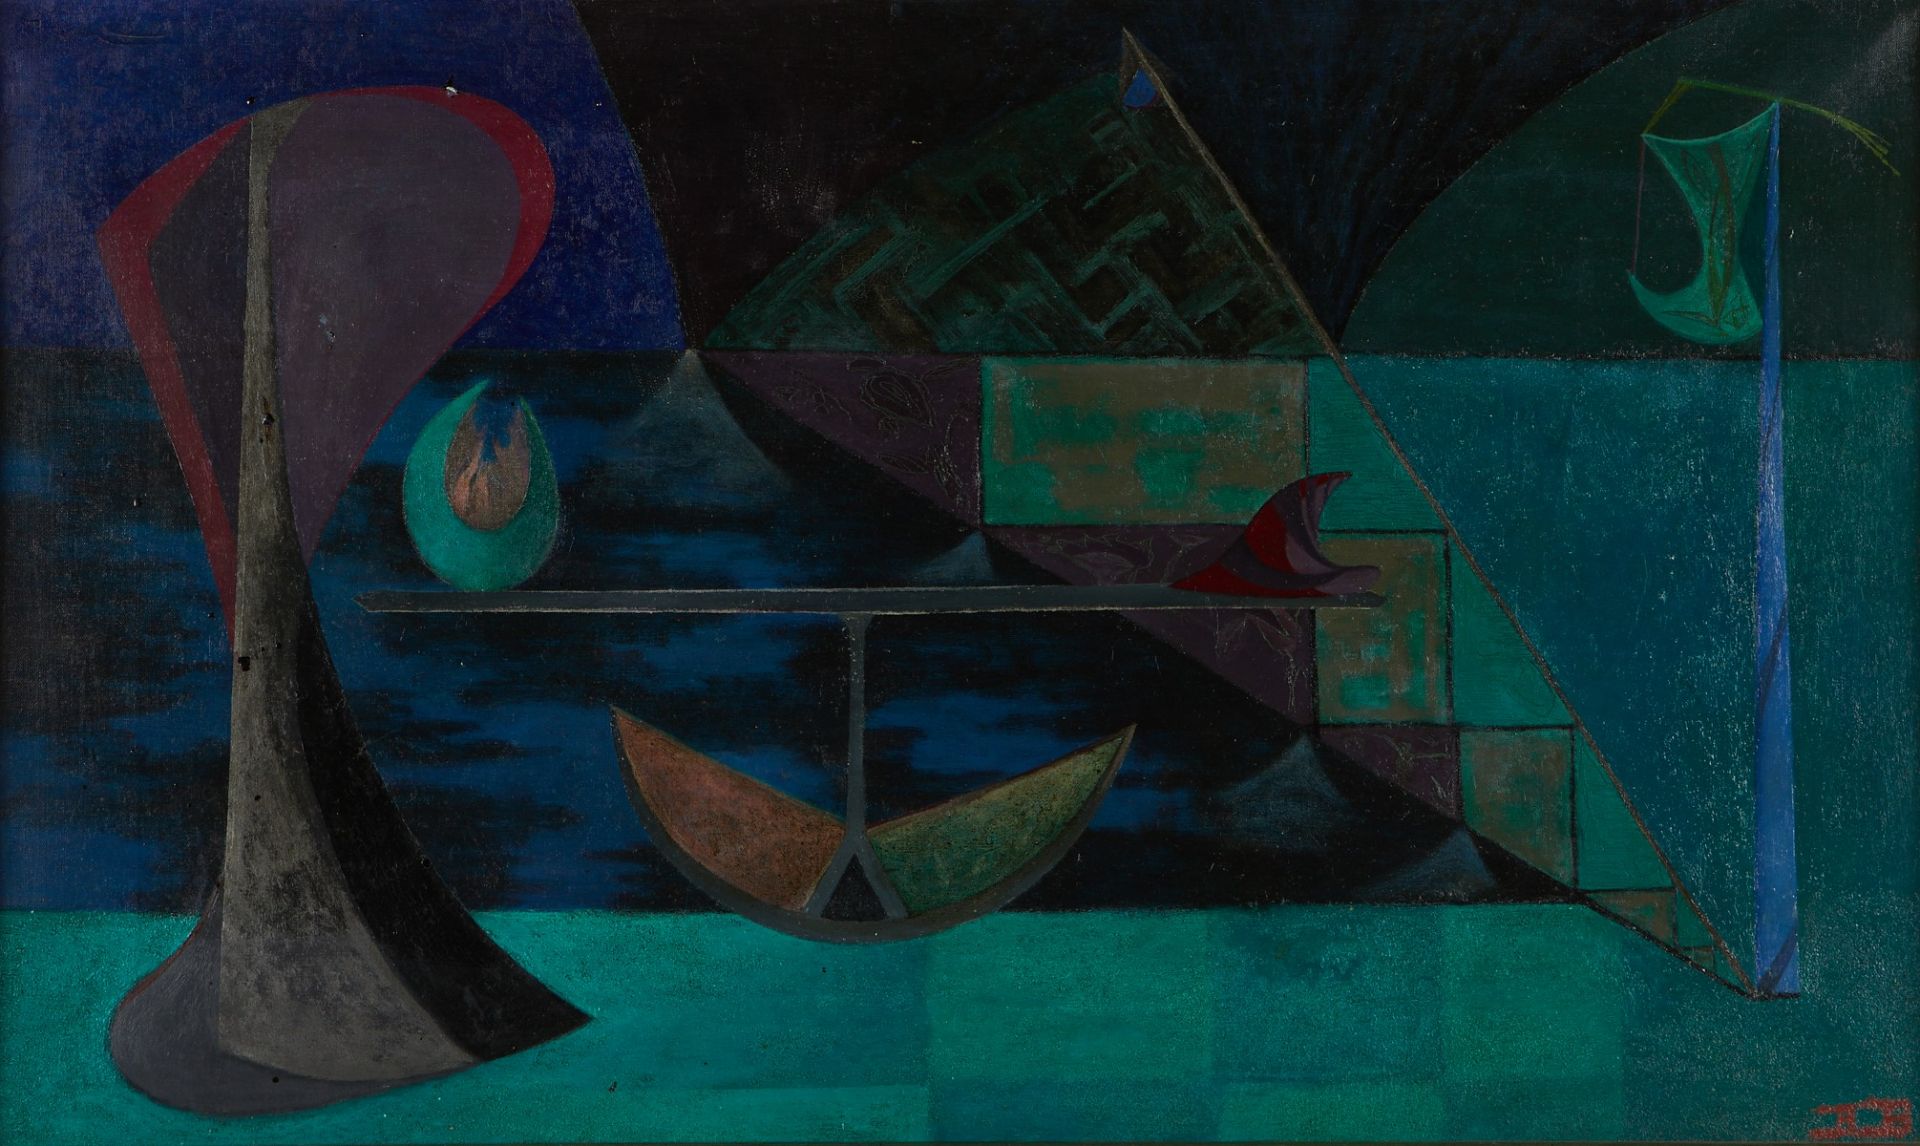 William Bomar "Question of Night" Oil on Canvas